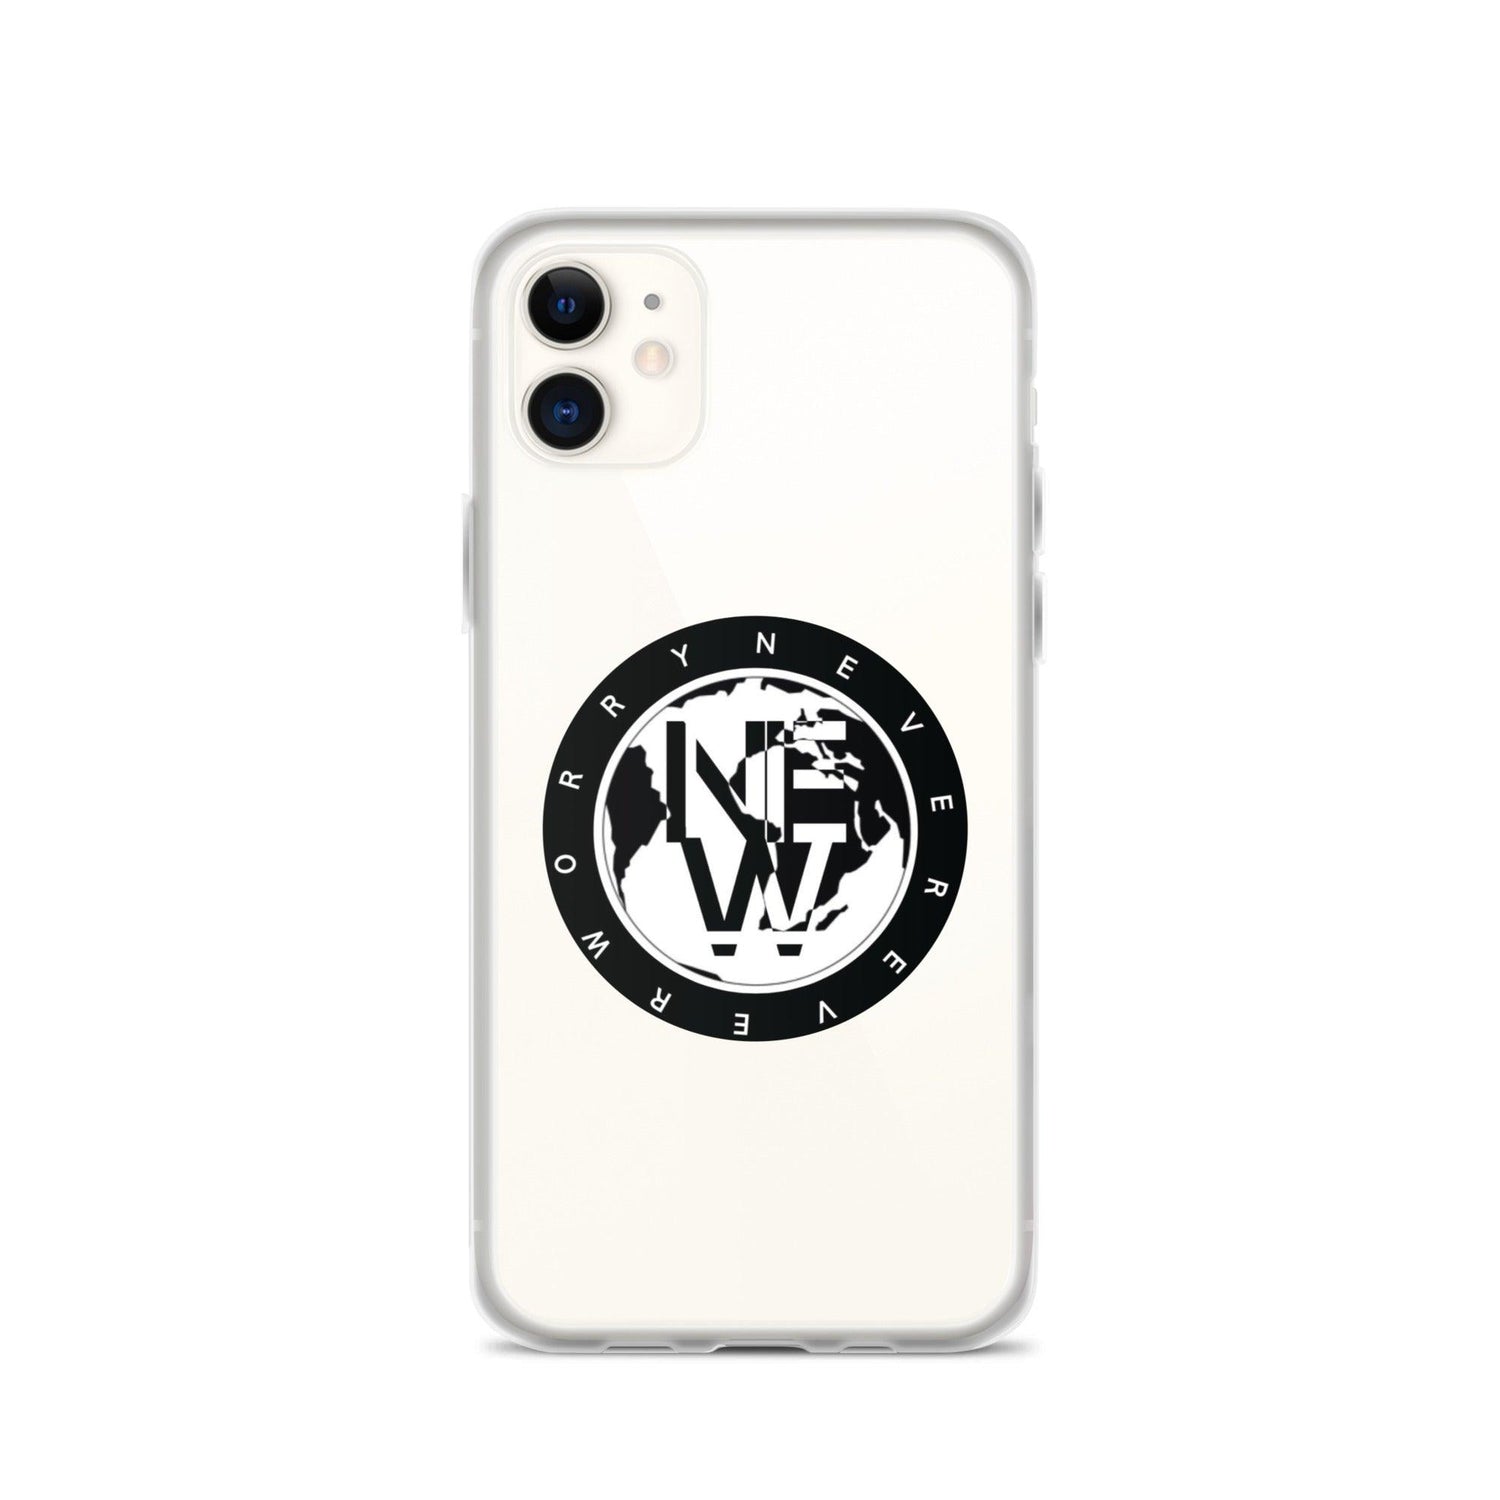 Jonathan Newsome "Never Worry" iPhone Case - Fan Arch